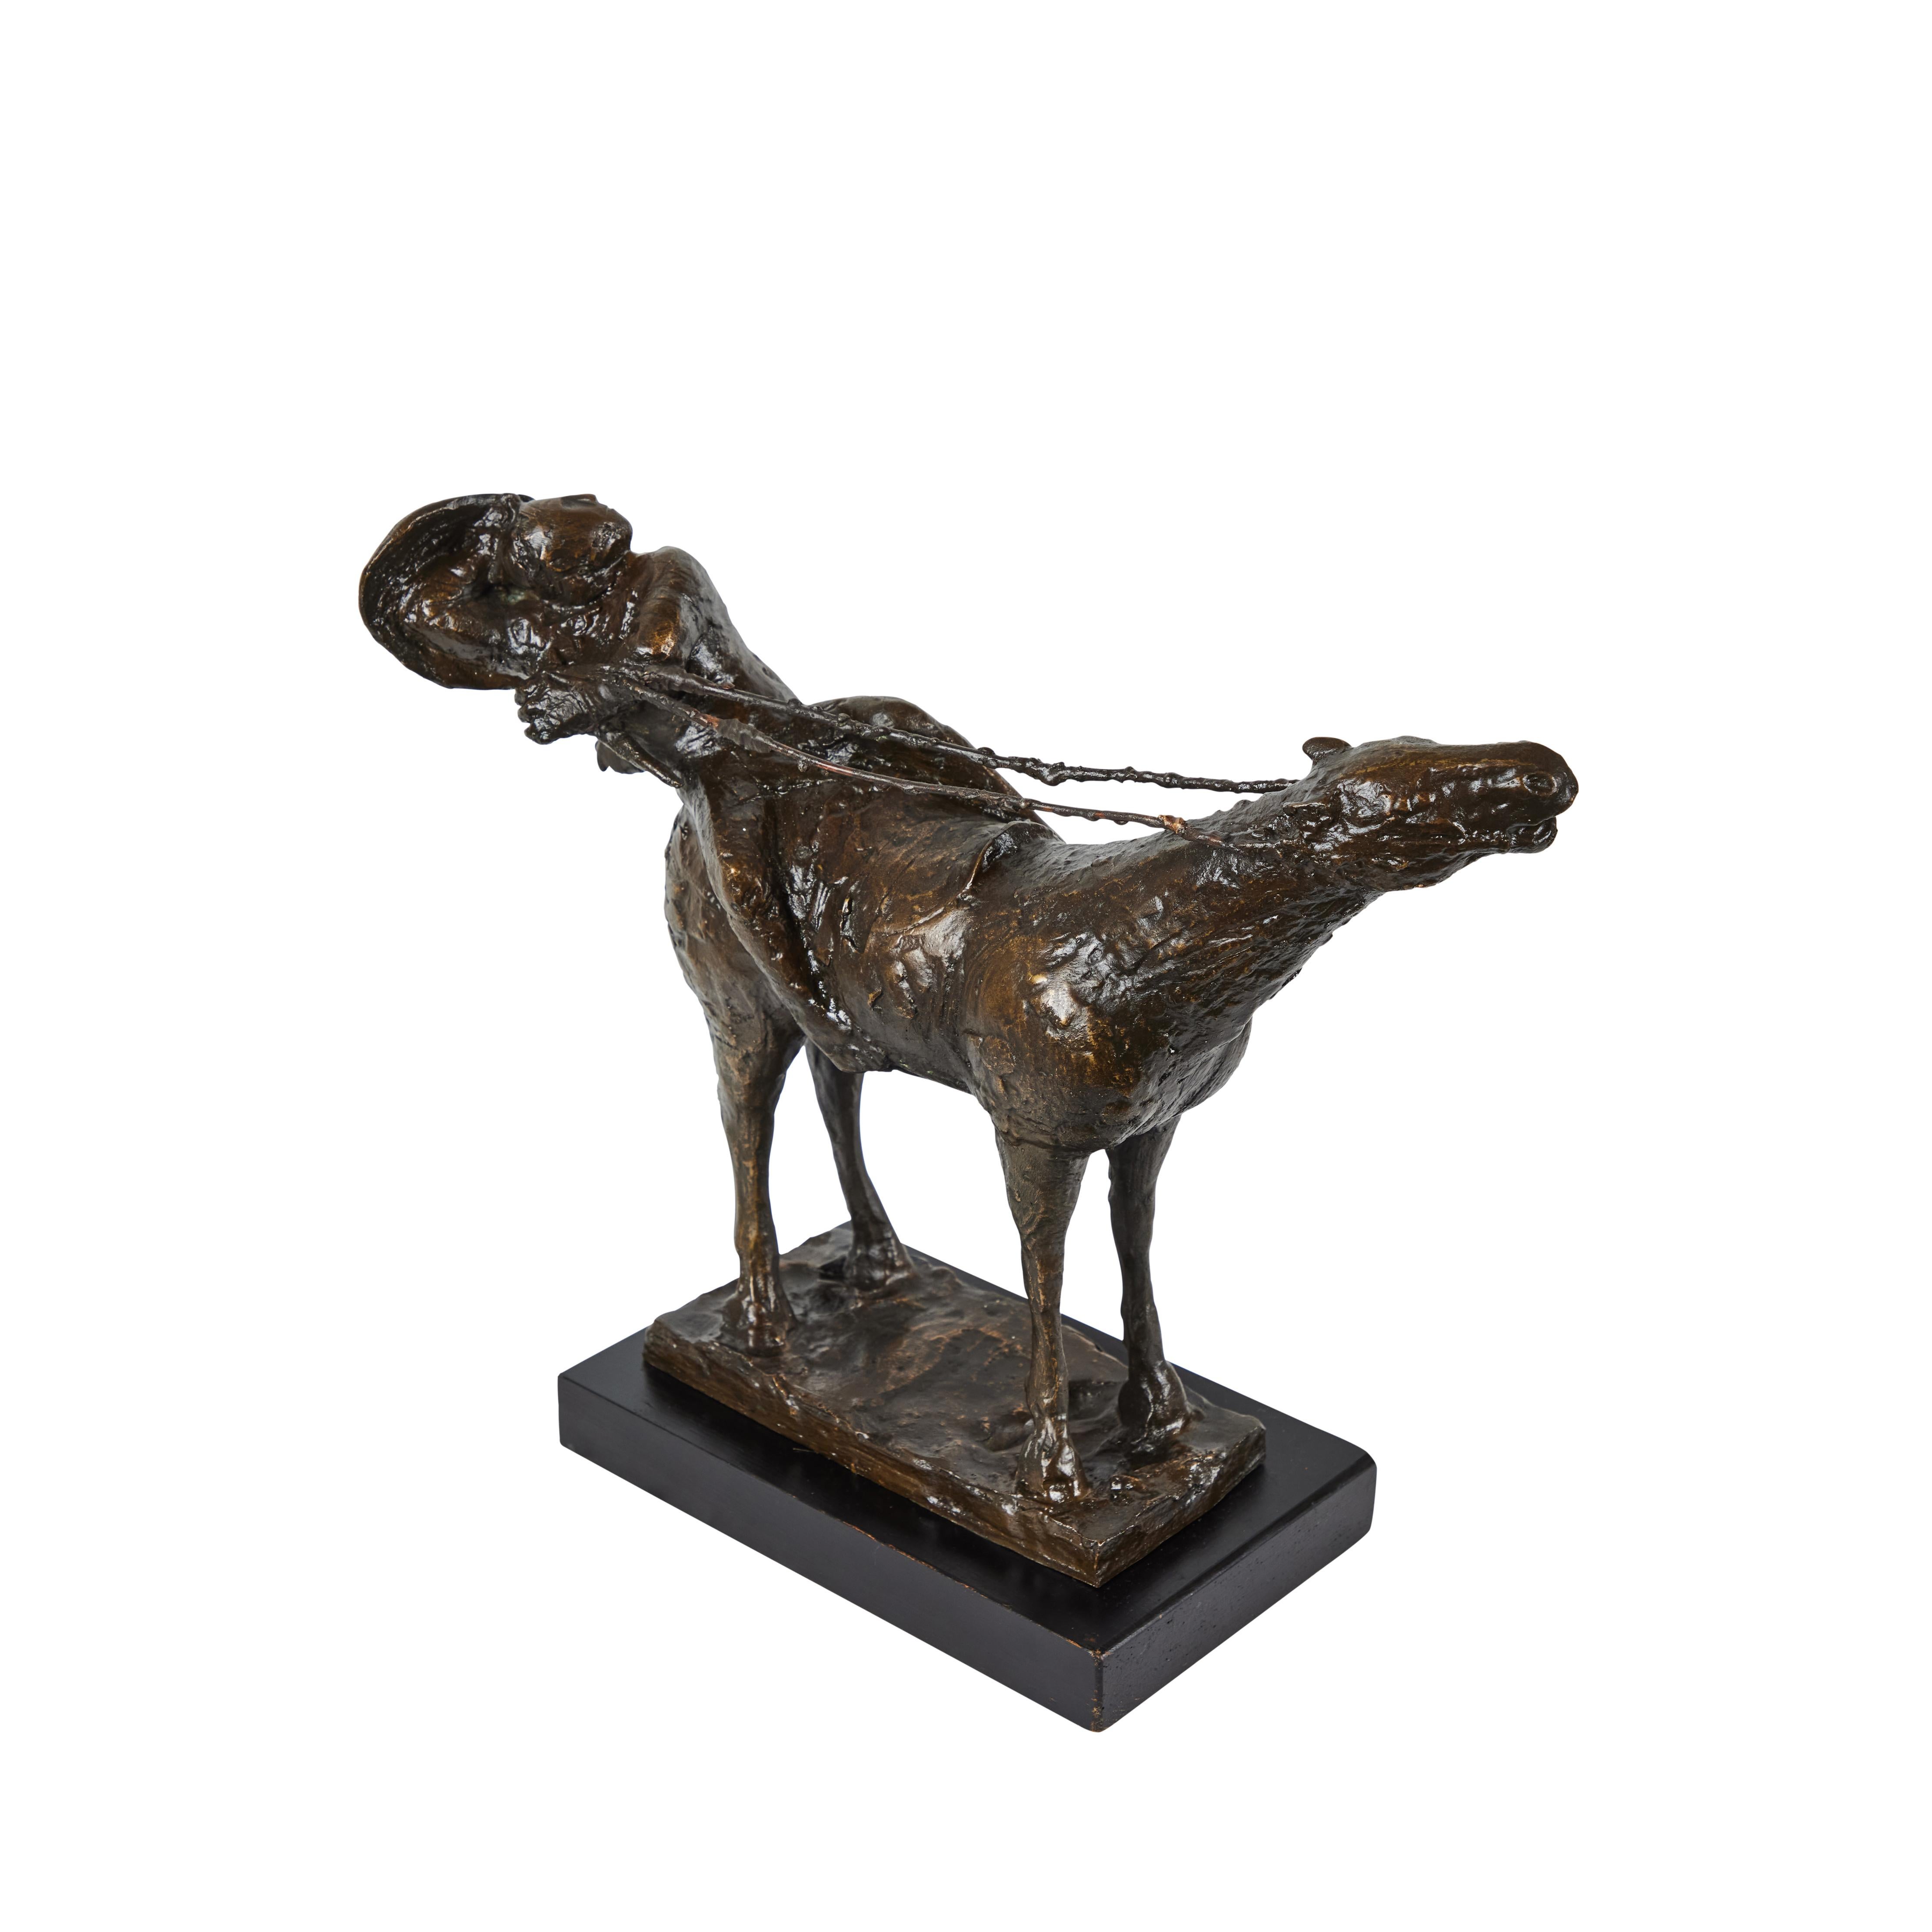 “On The Road” bronze sculpture by Italian sculptor Bruno Lucchesi (b. 1926).  Mounted on an ebonized wood base.